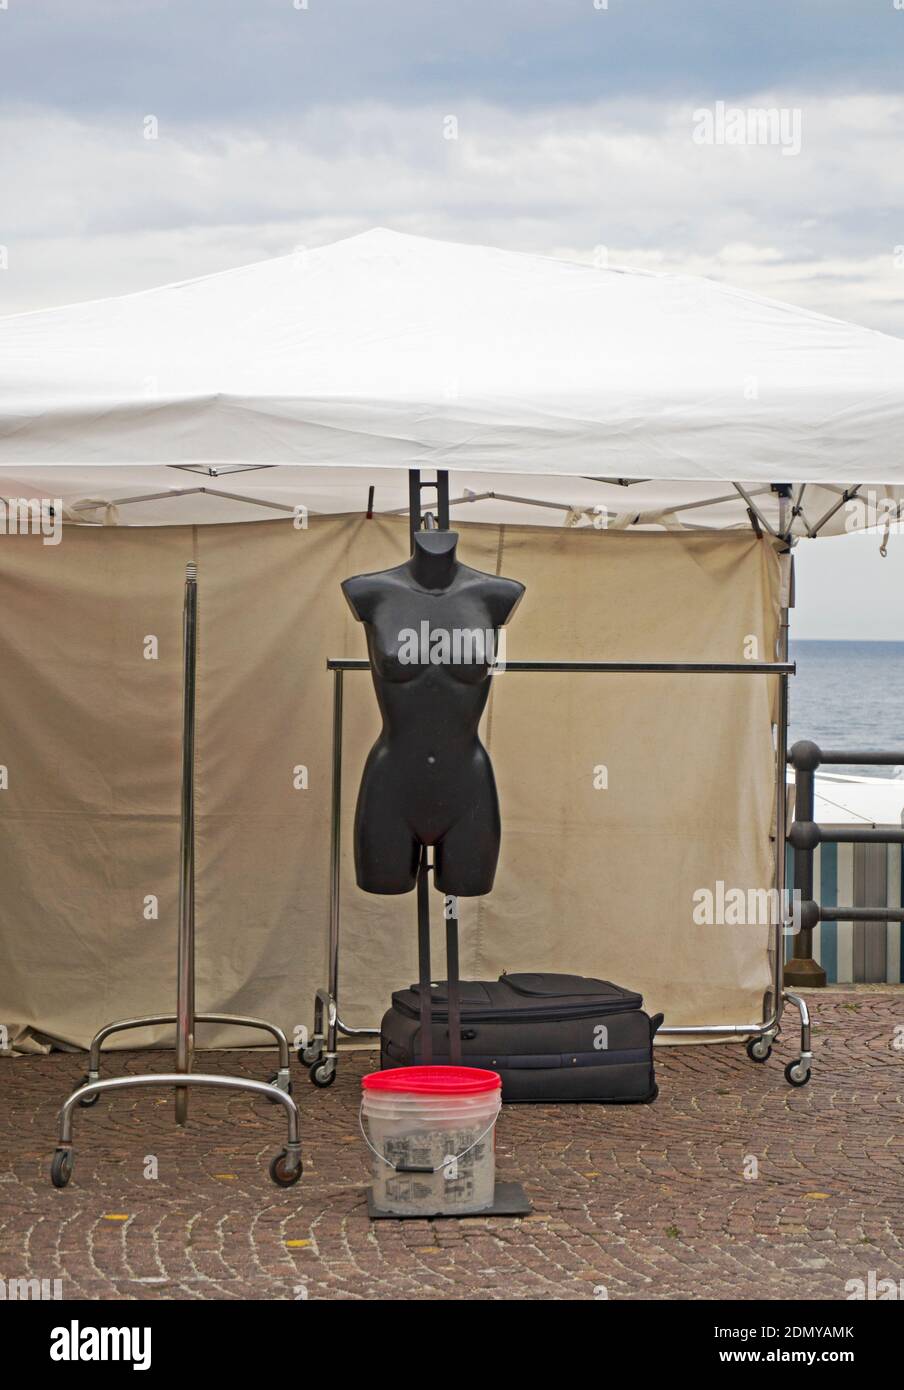 mannequin at an empty street market stall Stock Photo